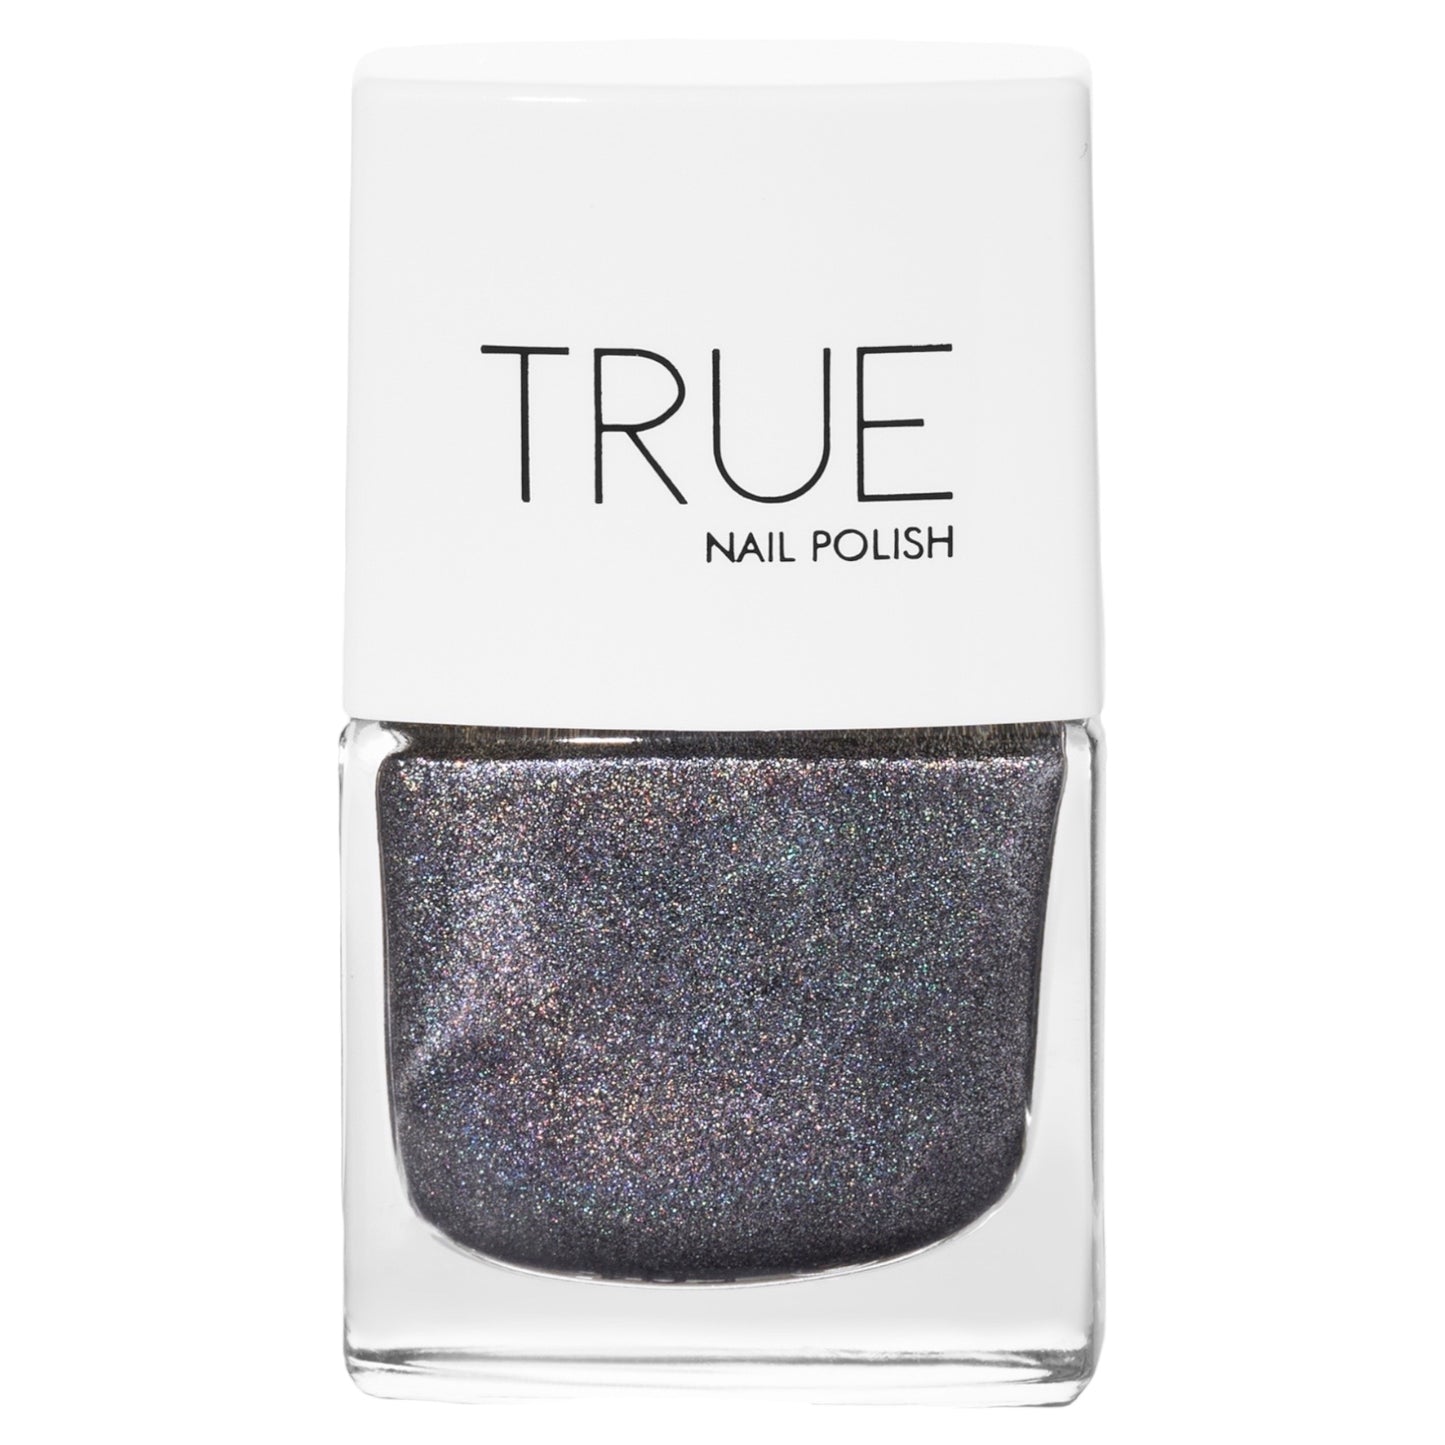 A bottle of Extravaganza, a grey holographic glitter shade from True Nail Polish